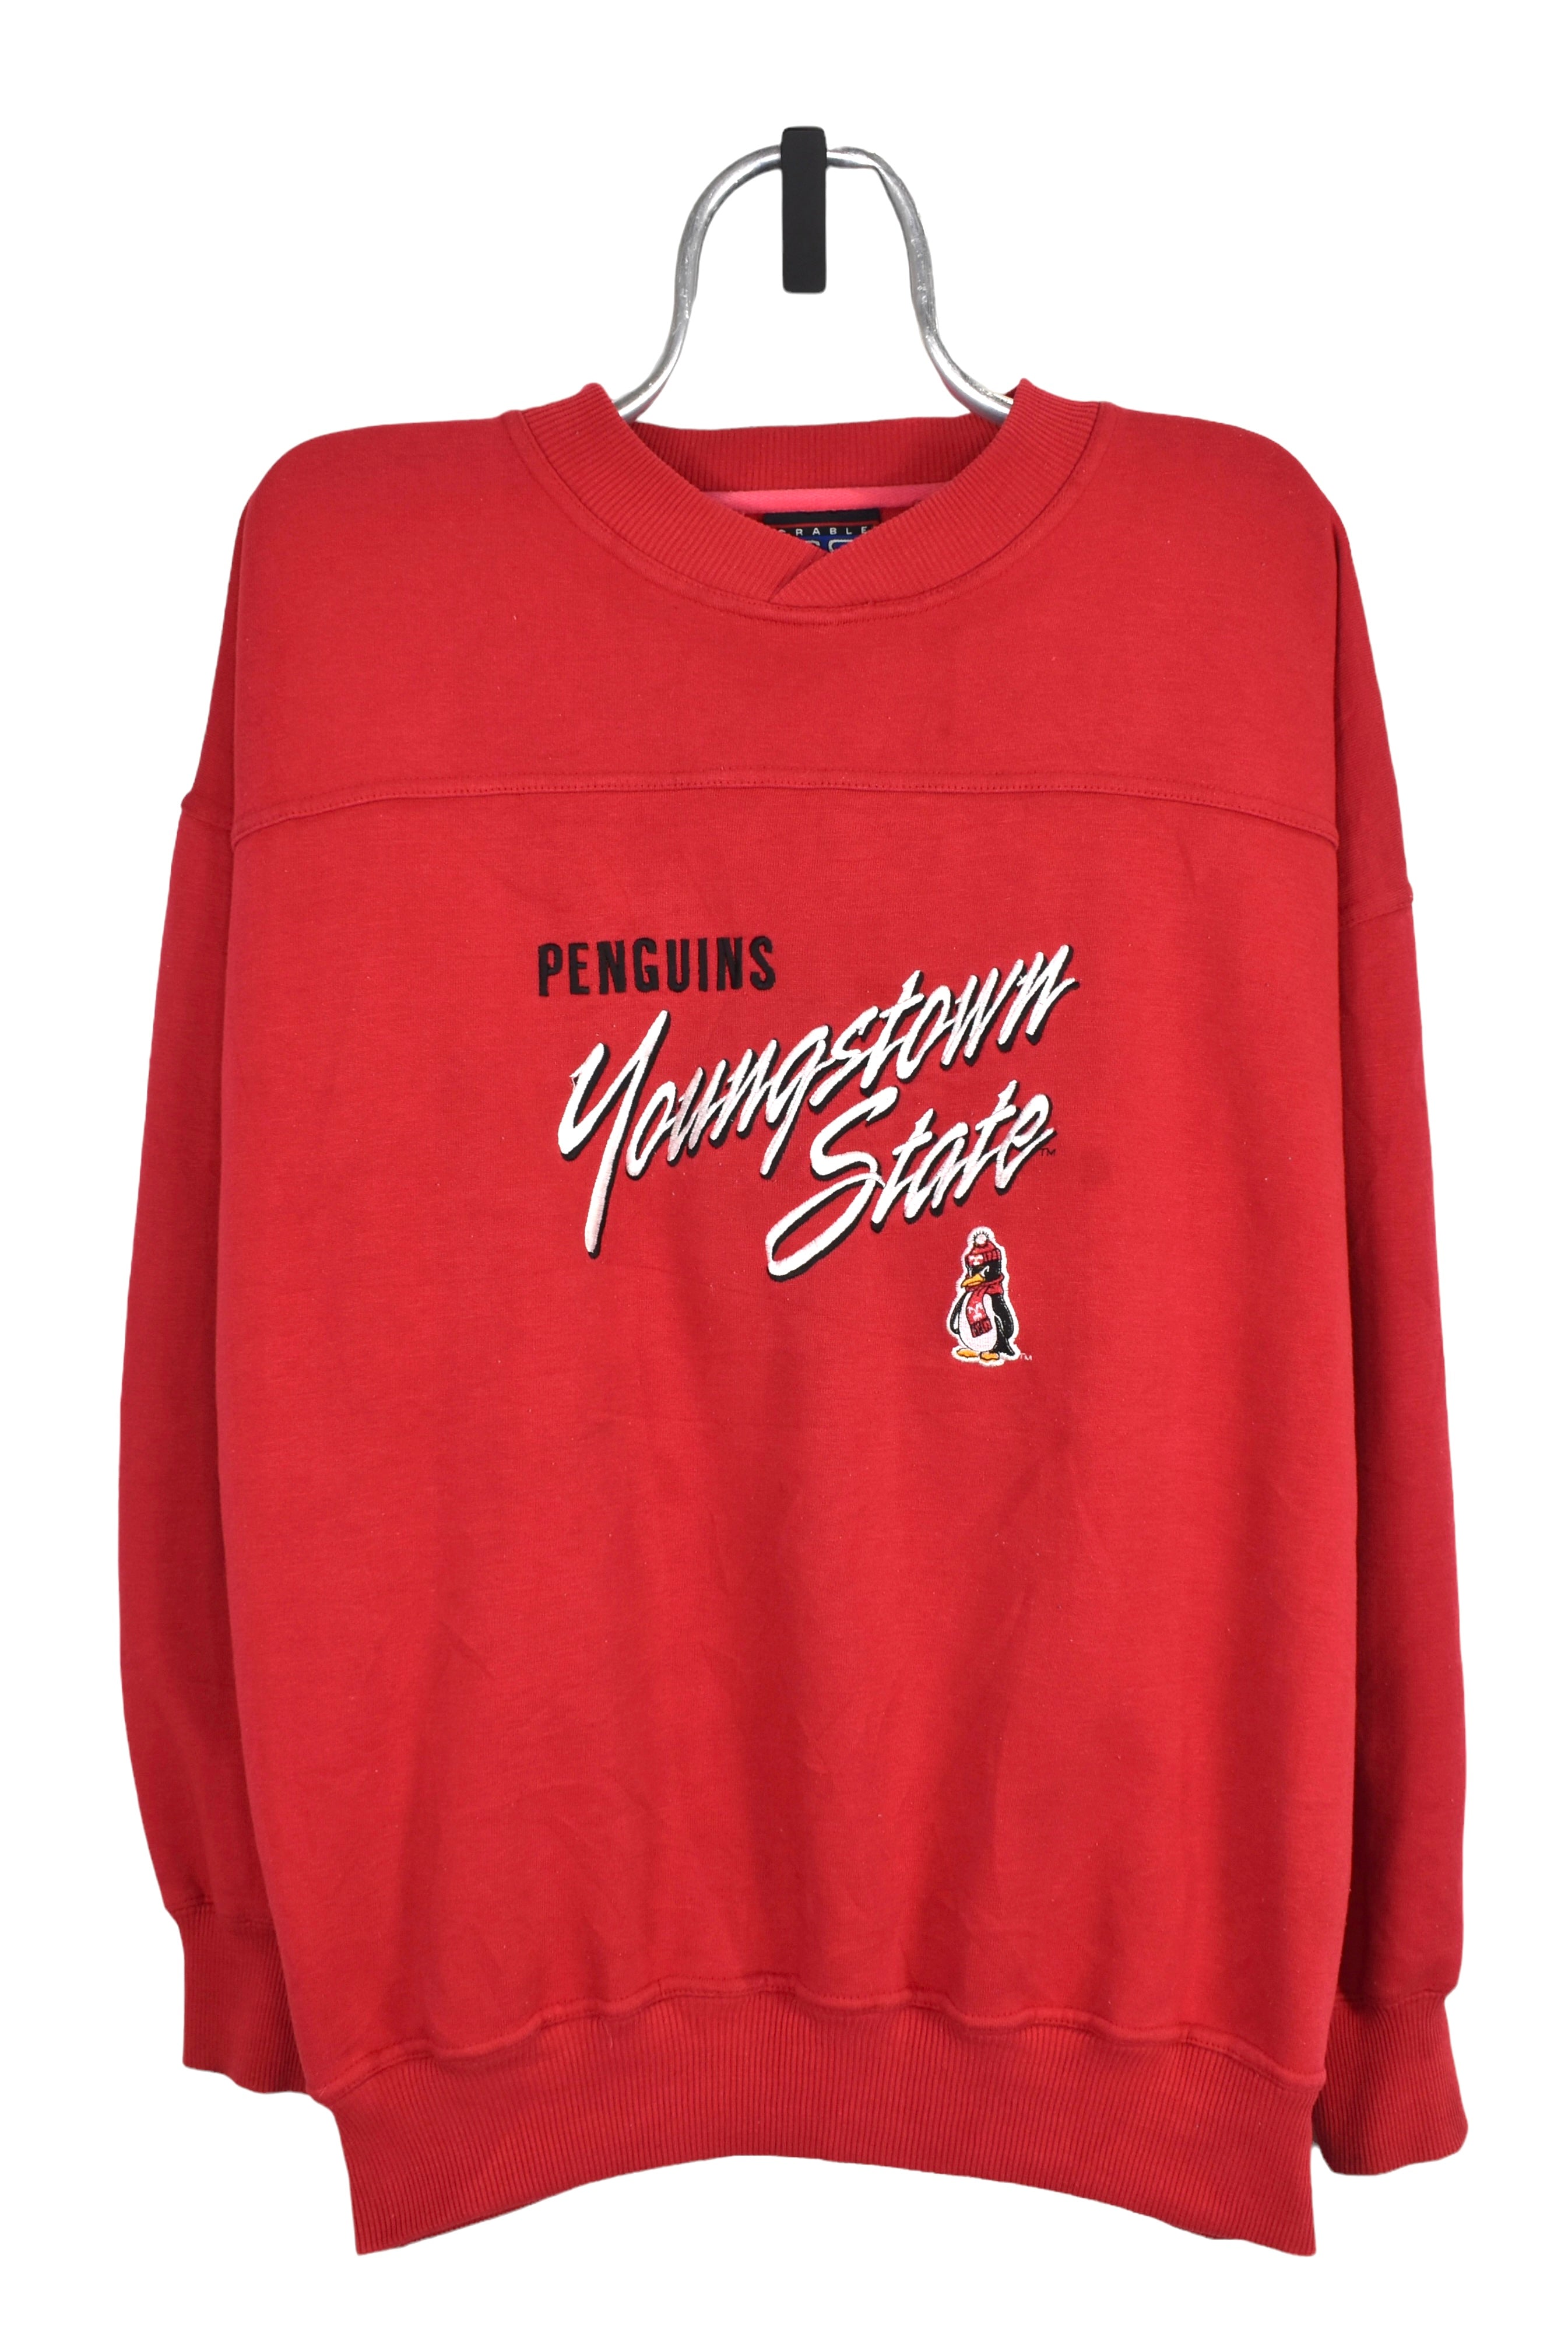 Vintage Youngstown State University sweatshirt (2XL), red embroidered crewneck